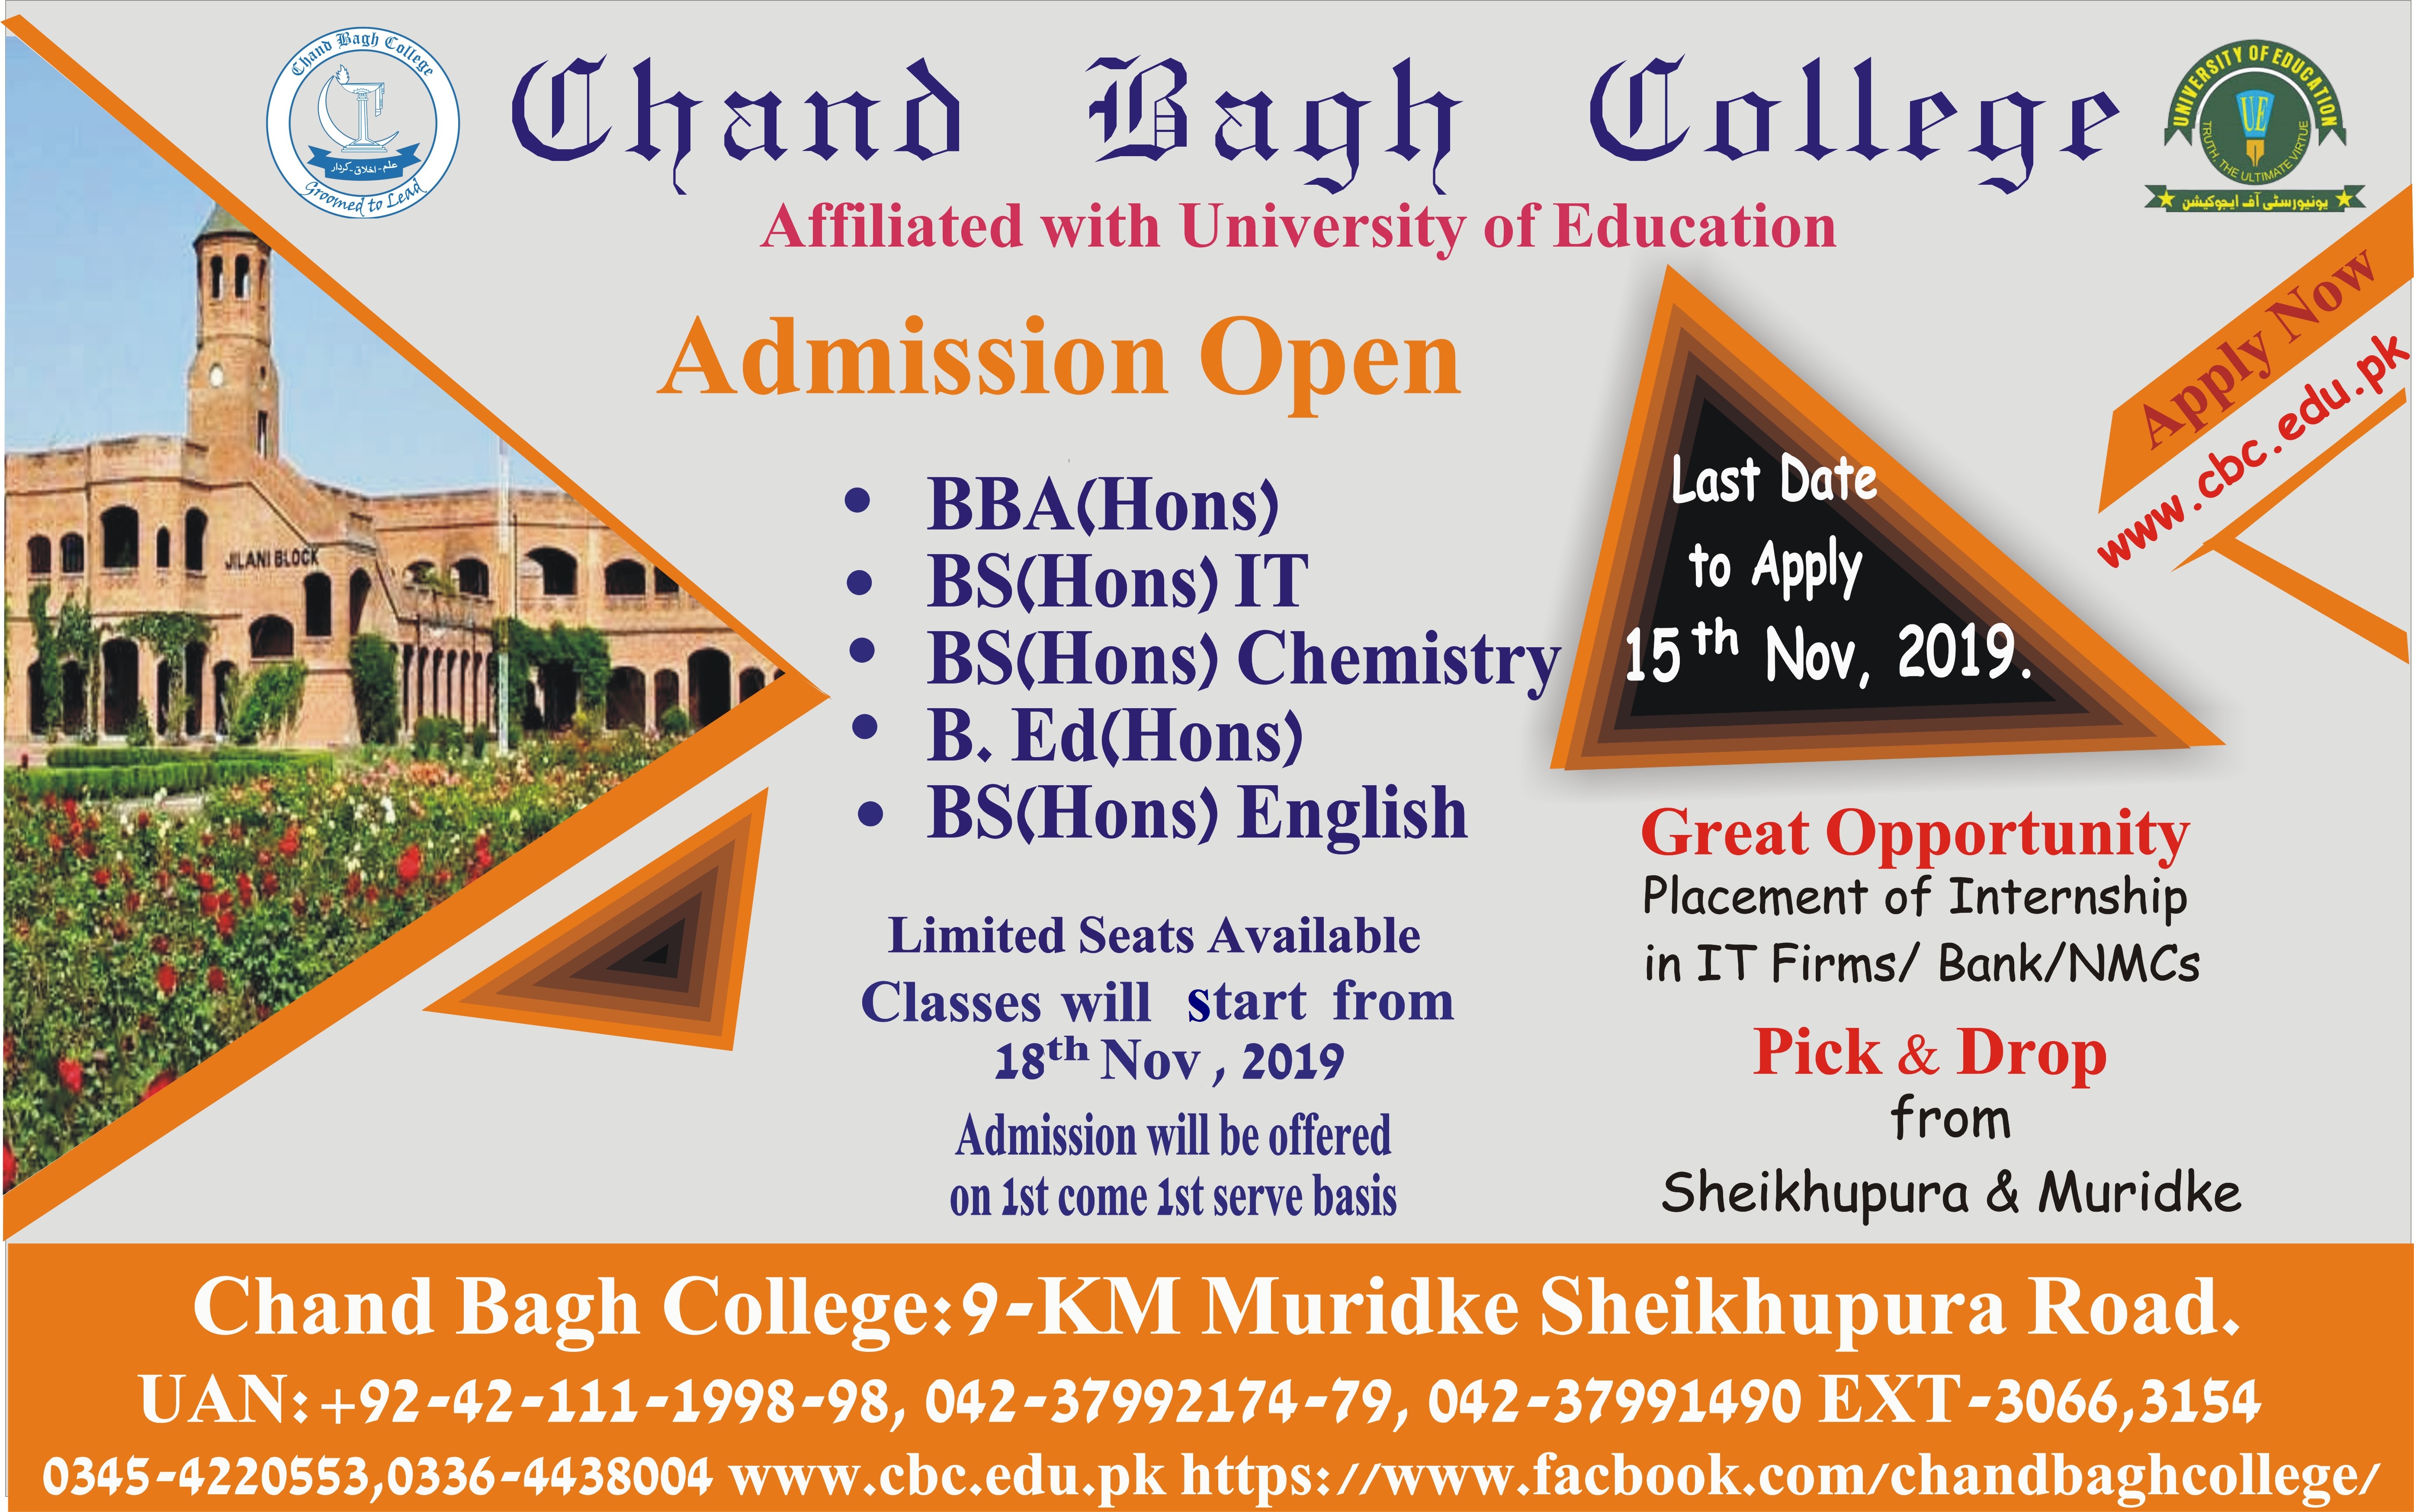 Chand Bagh College Muridke Admission 2019 in BS, BBA & BEd (Hons), Apply Online